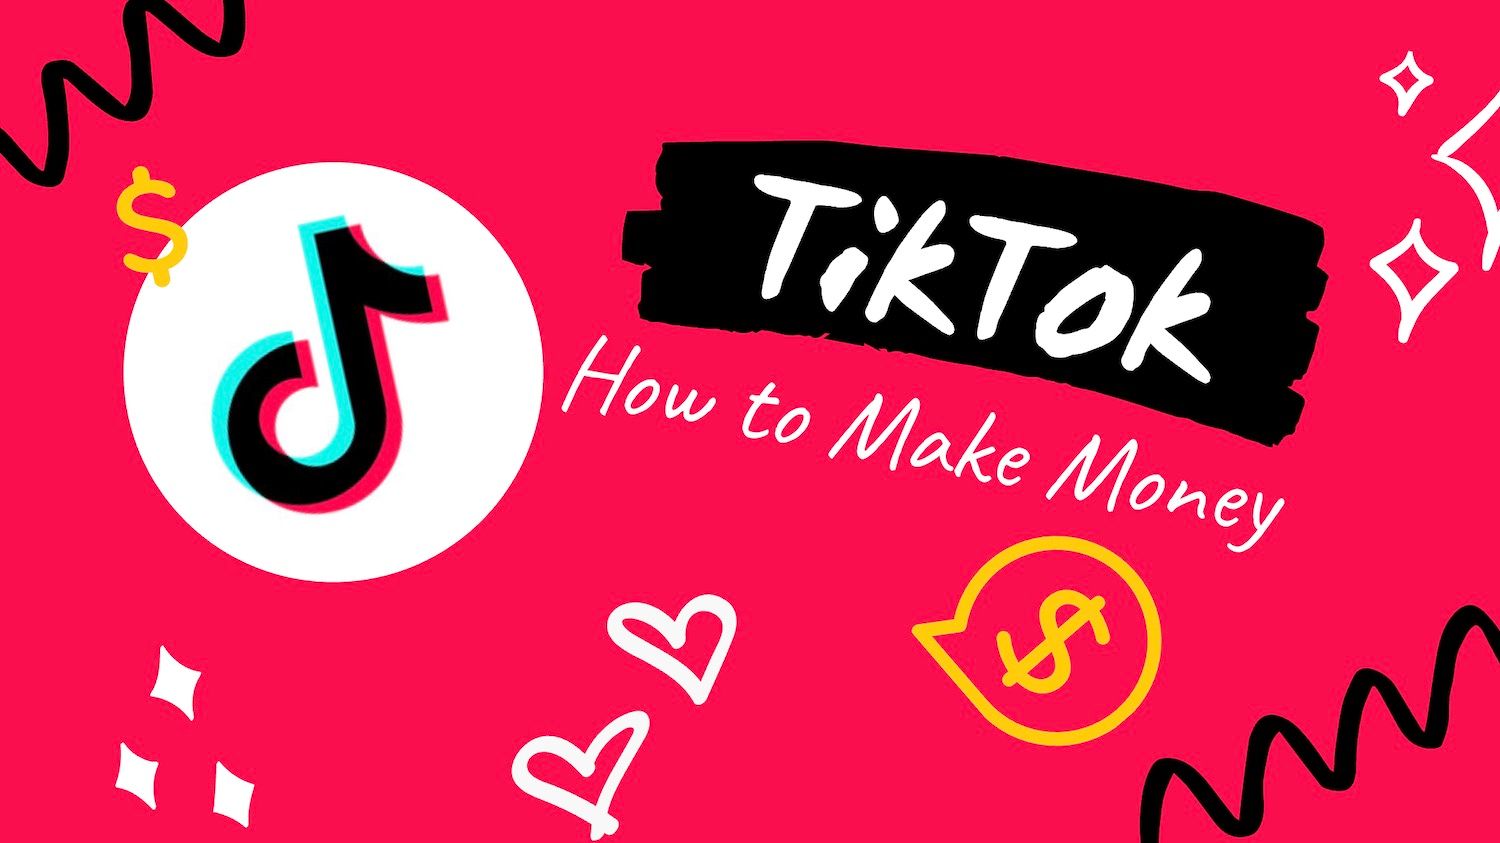 How People are Making Money off TikTok